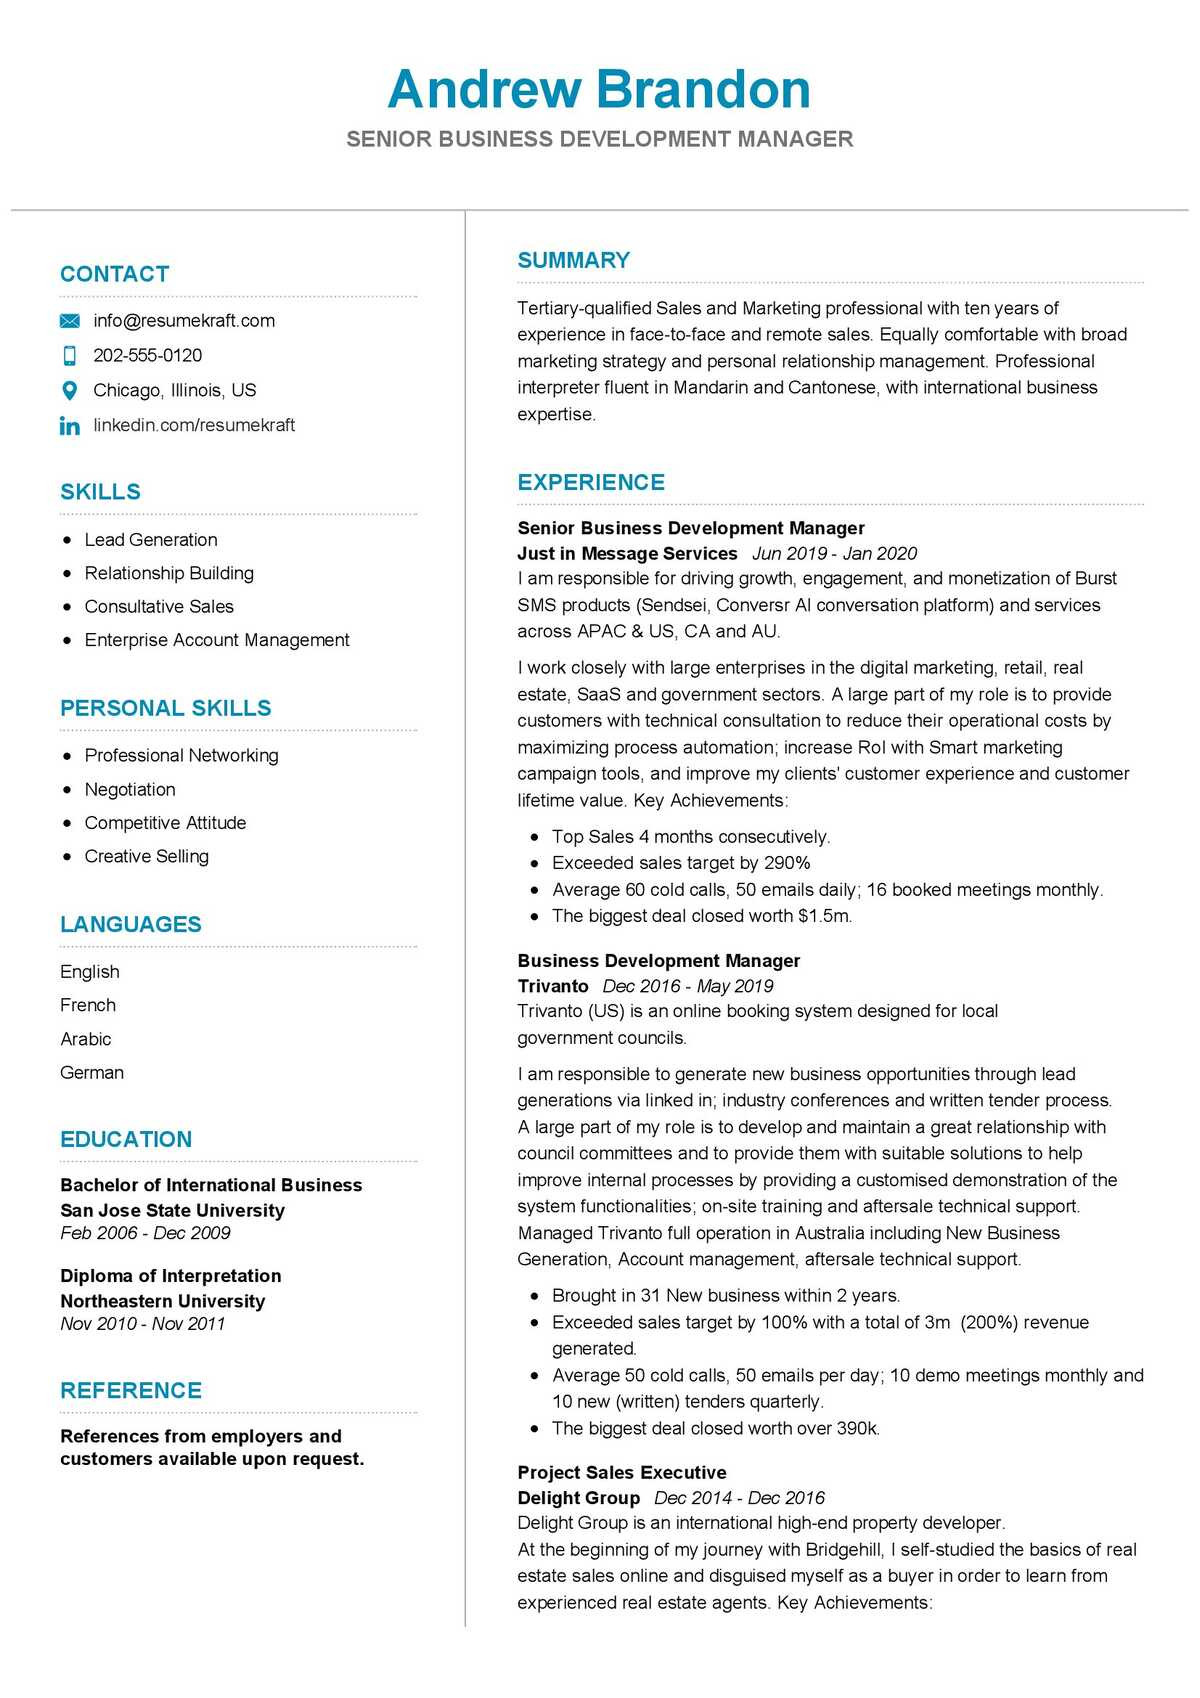 Sample Resume for Experienced Business Development Manager Senior Business Development Manager Resume Sample 2022 Writing …